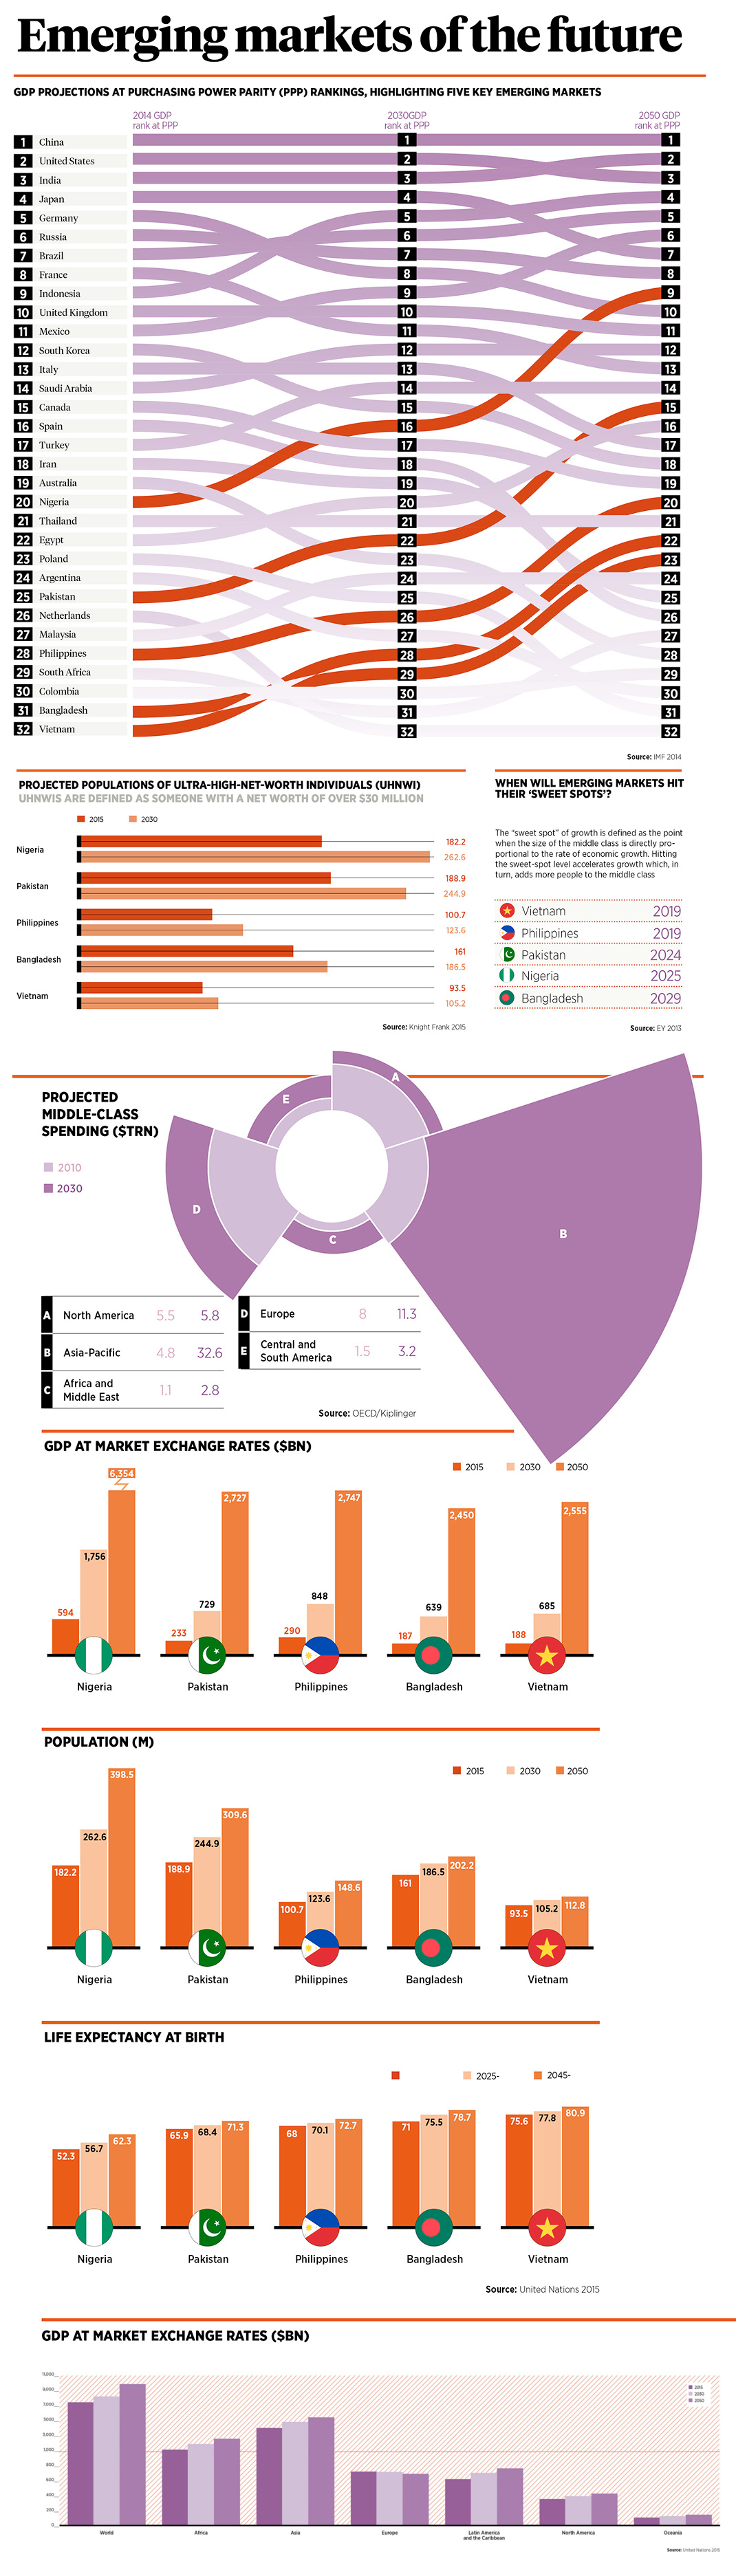 Visualizing the Emerging Markets of the Future